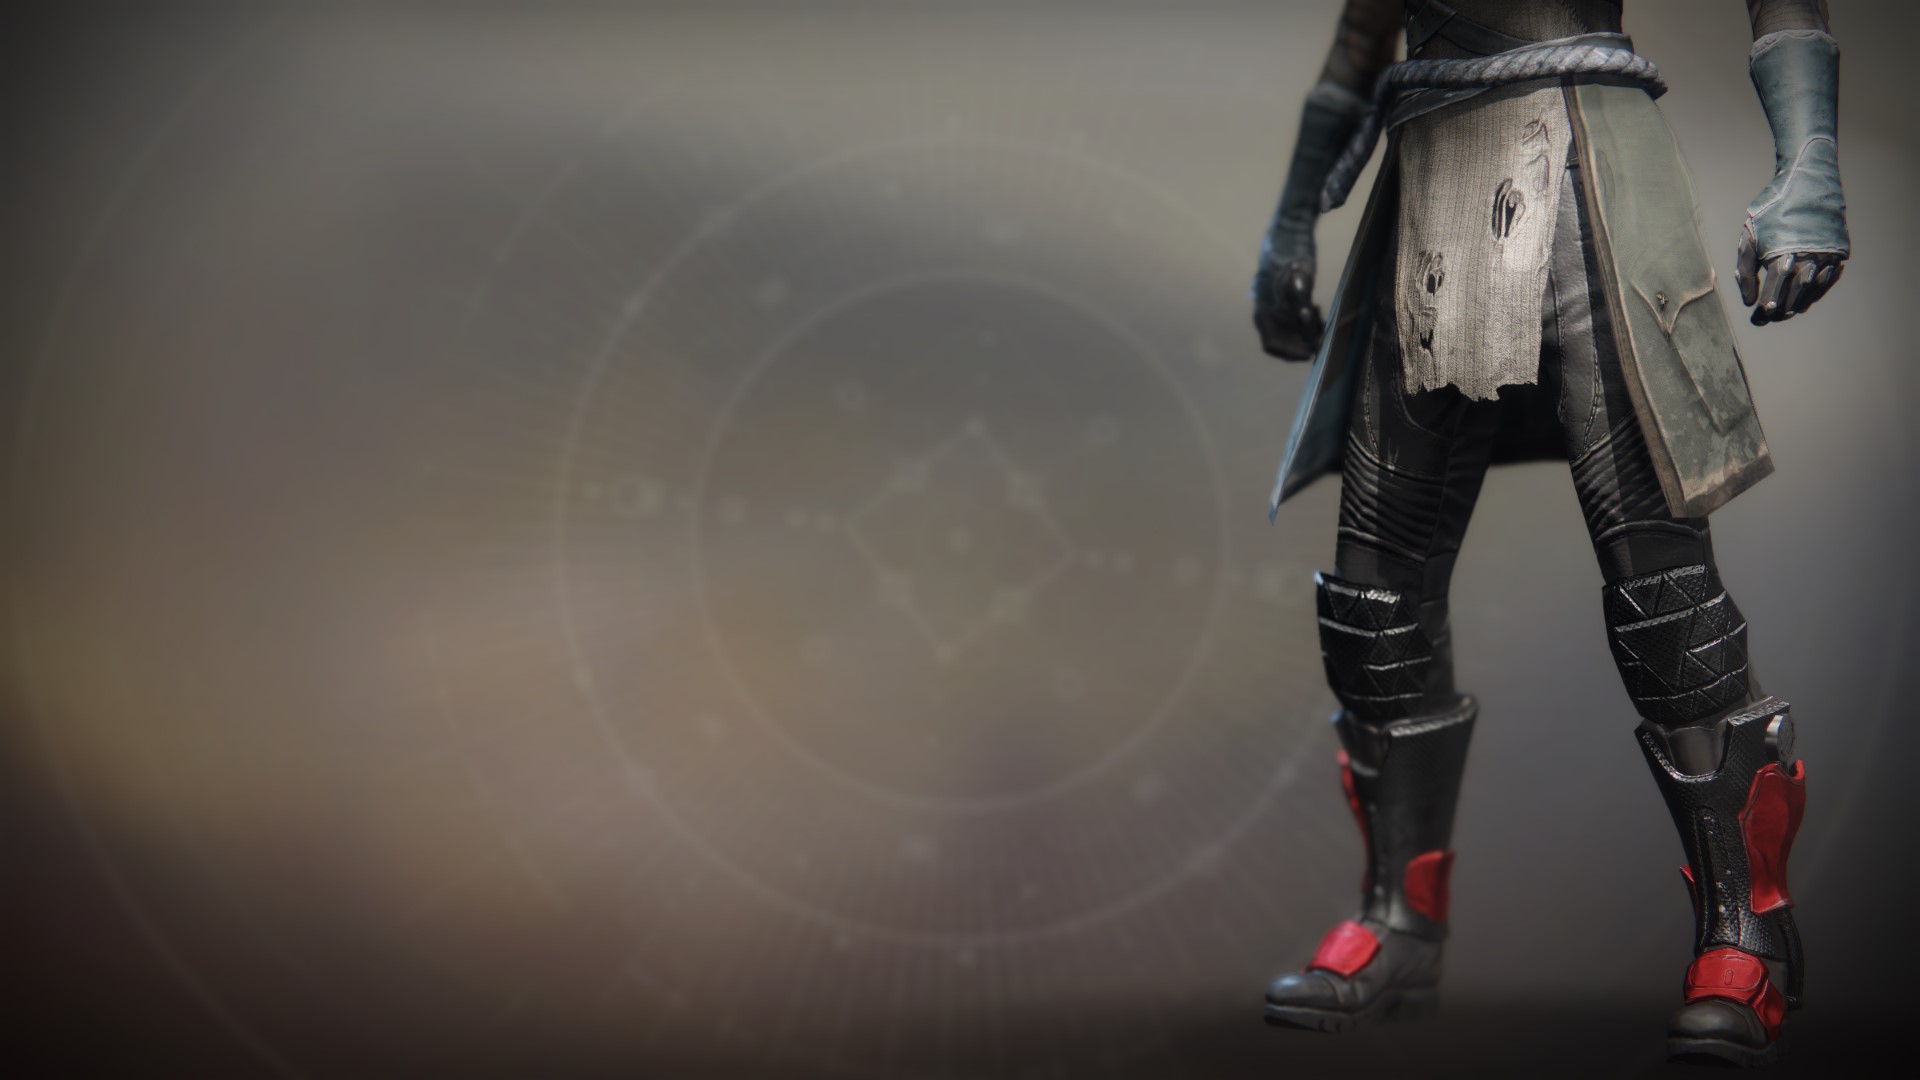 An in-game render of the Gunsmith's Devotion Boots.